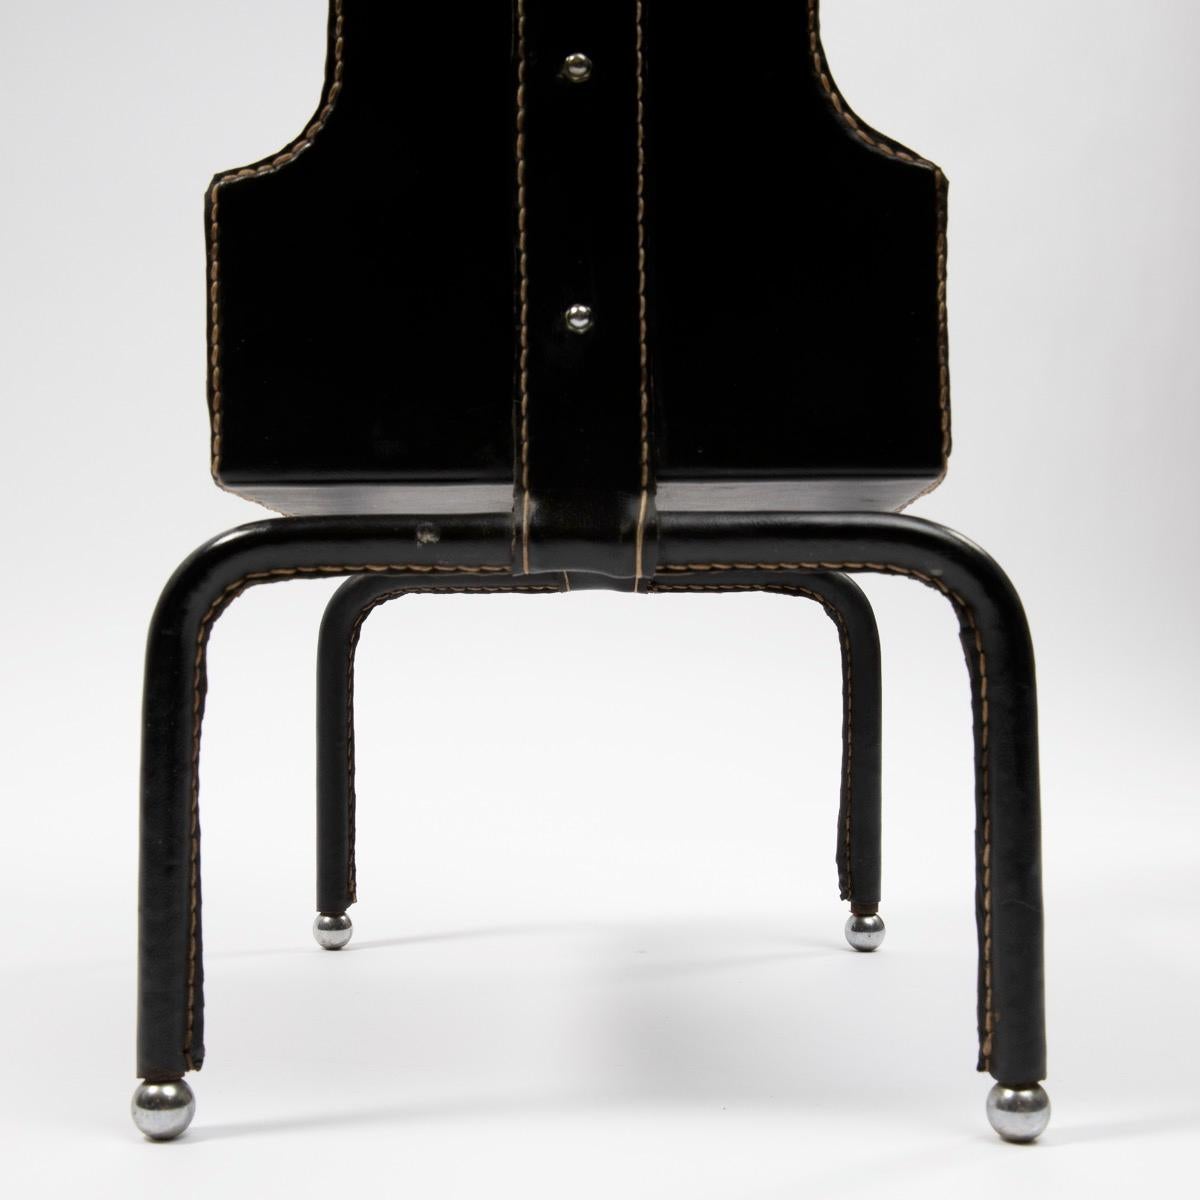 Jacques Adnet, Side Table Covered with Black Leather Saddle Stitched 1